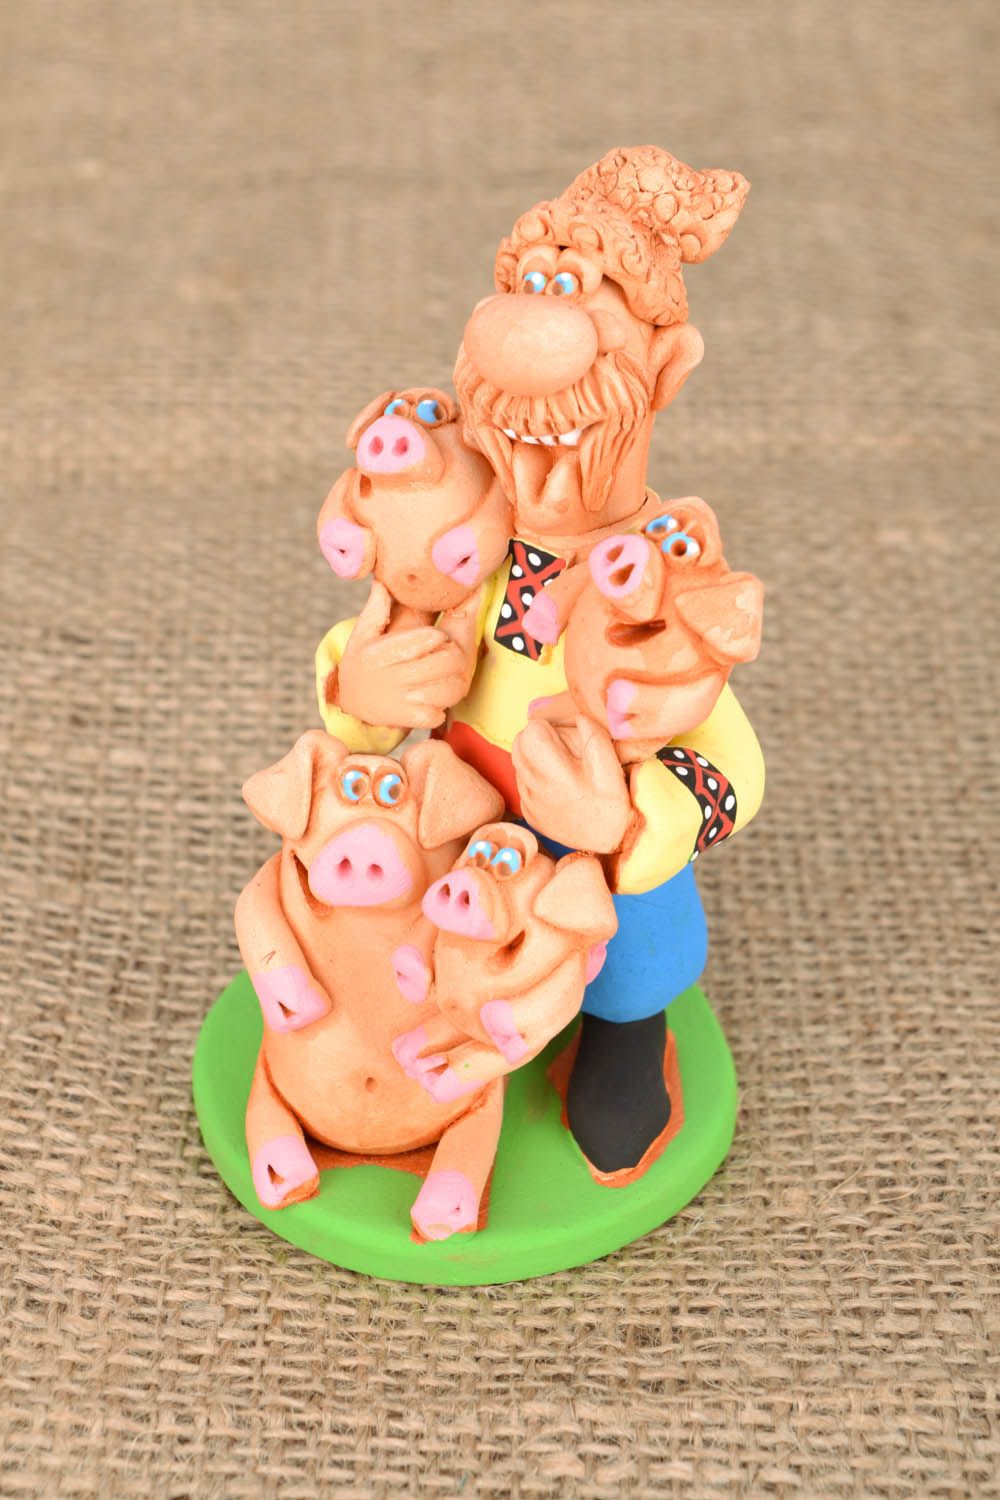 Handmade ceramic statuette The Cossack with Piglets photo 1